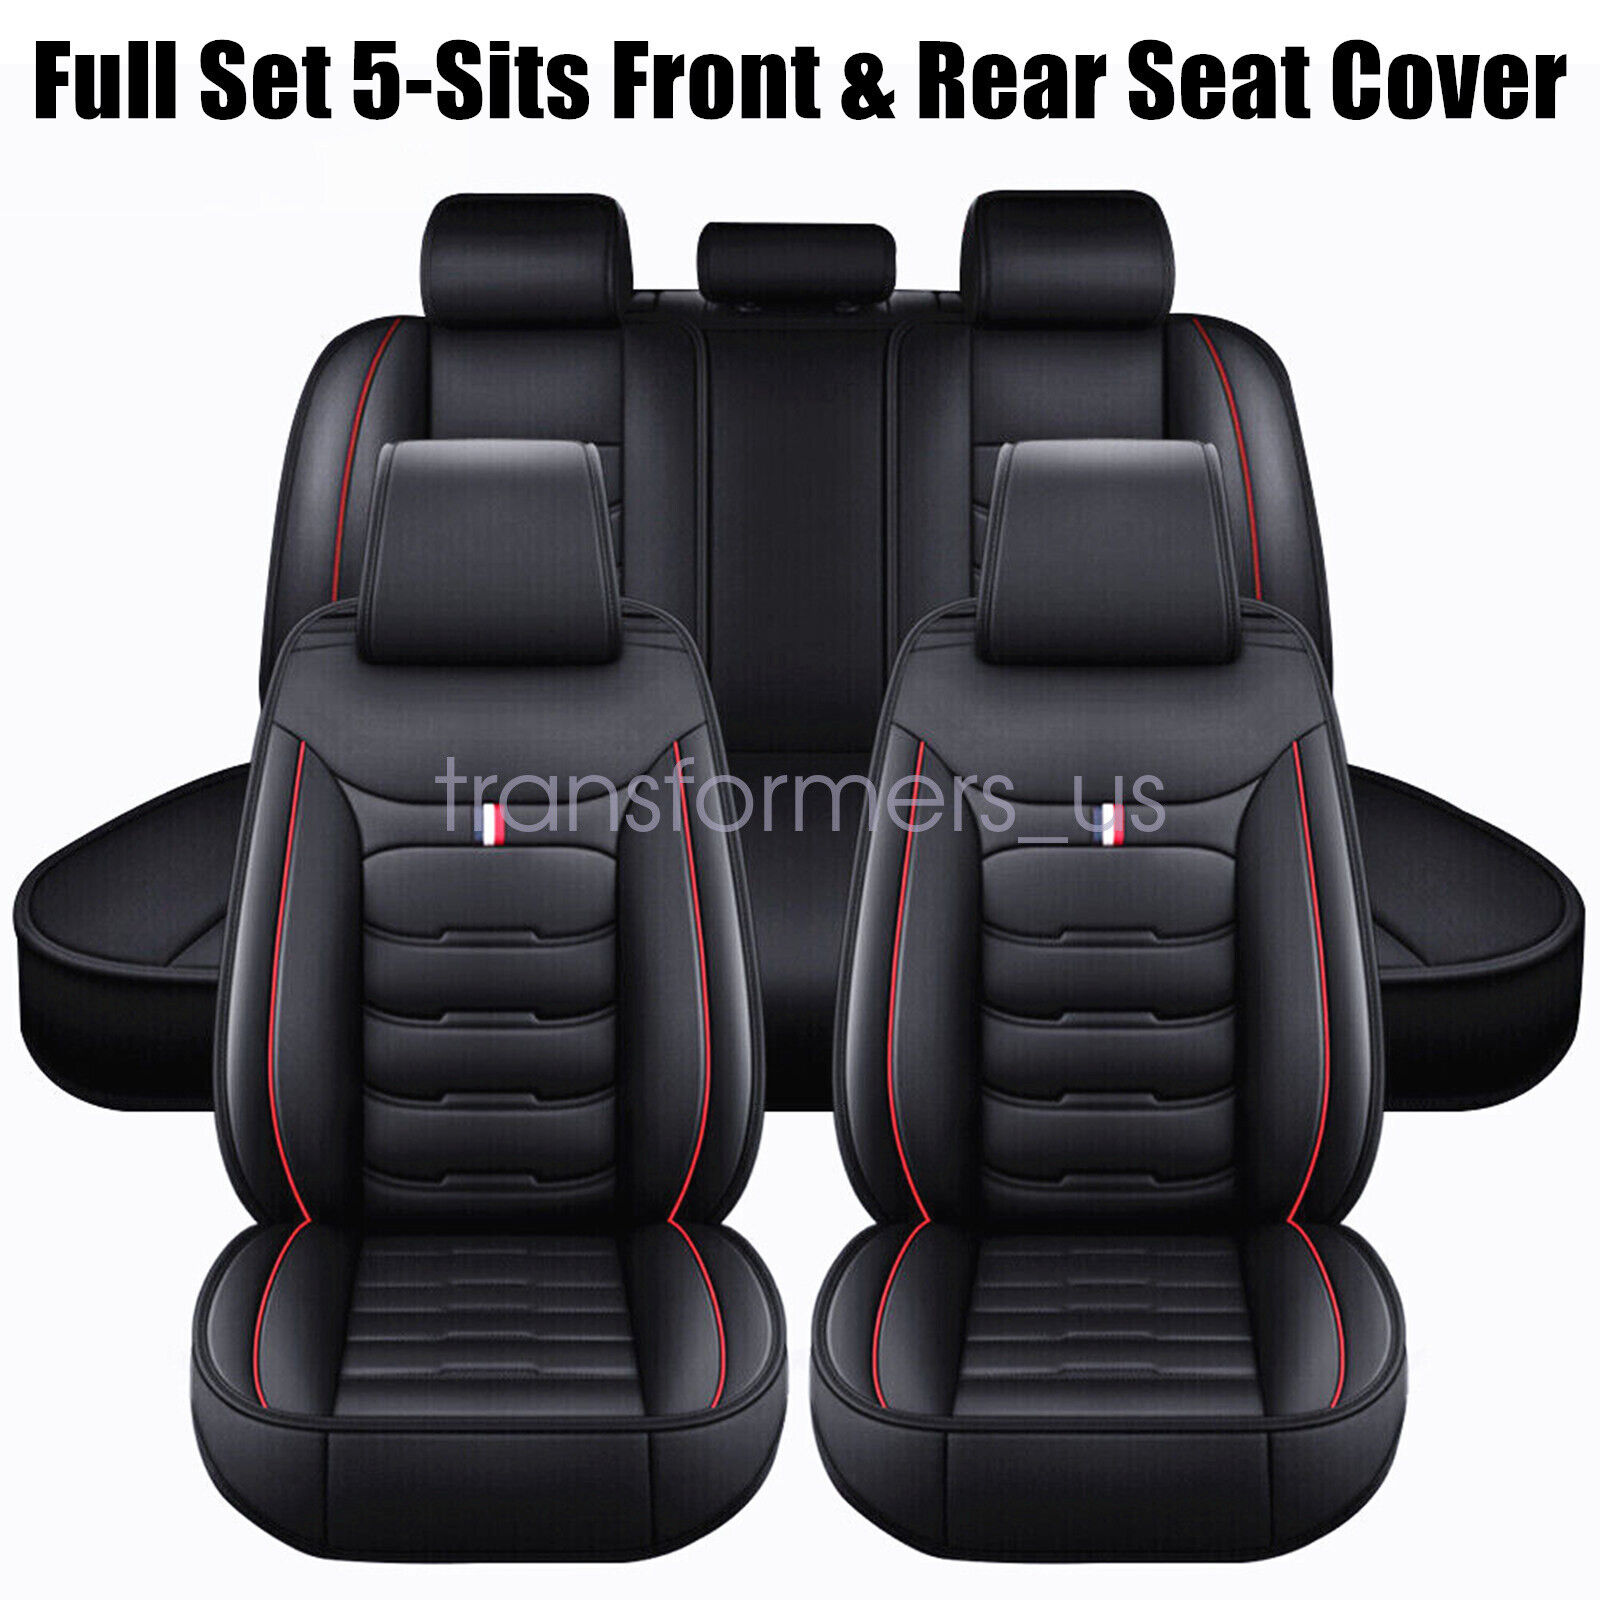 For TOYOTA Front & Rear Leather Seat Covers Full Set 5-Sits Cushion Protector